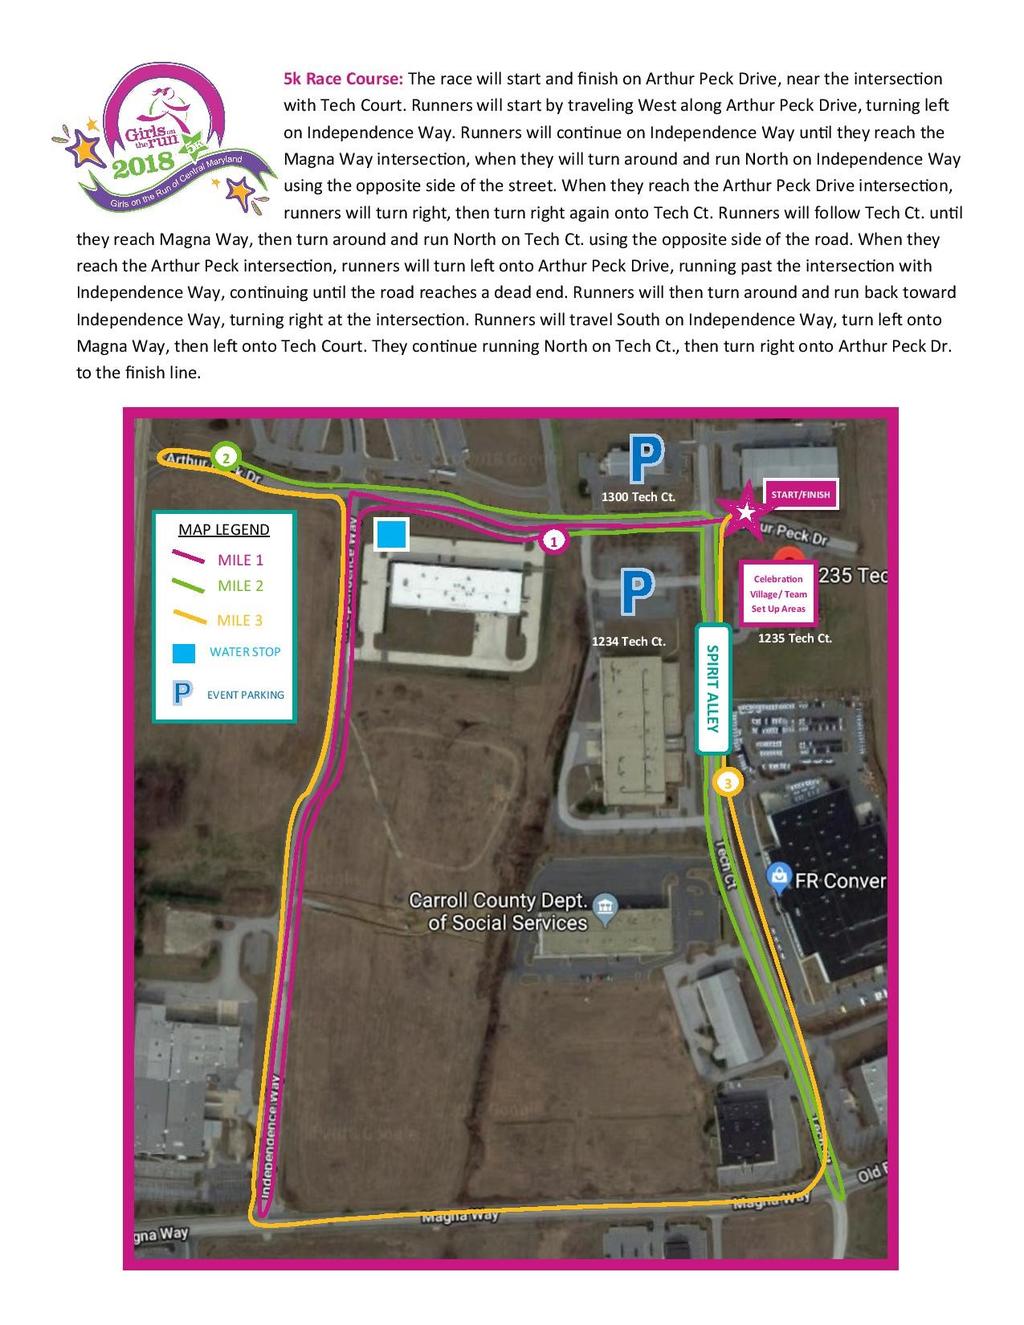 Where: 1235 Tech Court Westminster, MD 21157 It is important to be on site and ready to run by 7:45 am to line up for our wave start. Those who arrive later than 7:45 am MAY NOT BE PERMITTED TO RUN.